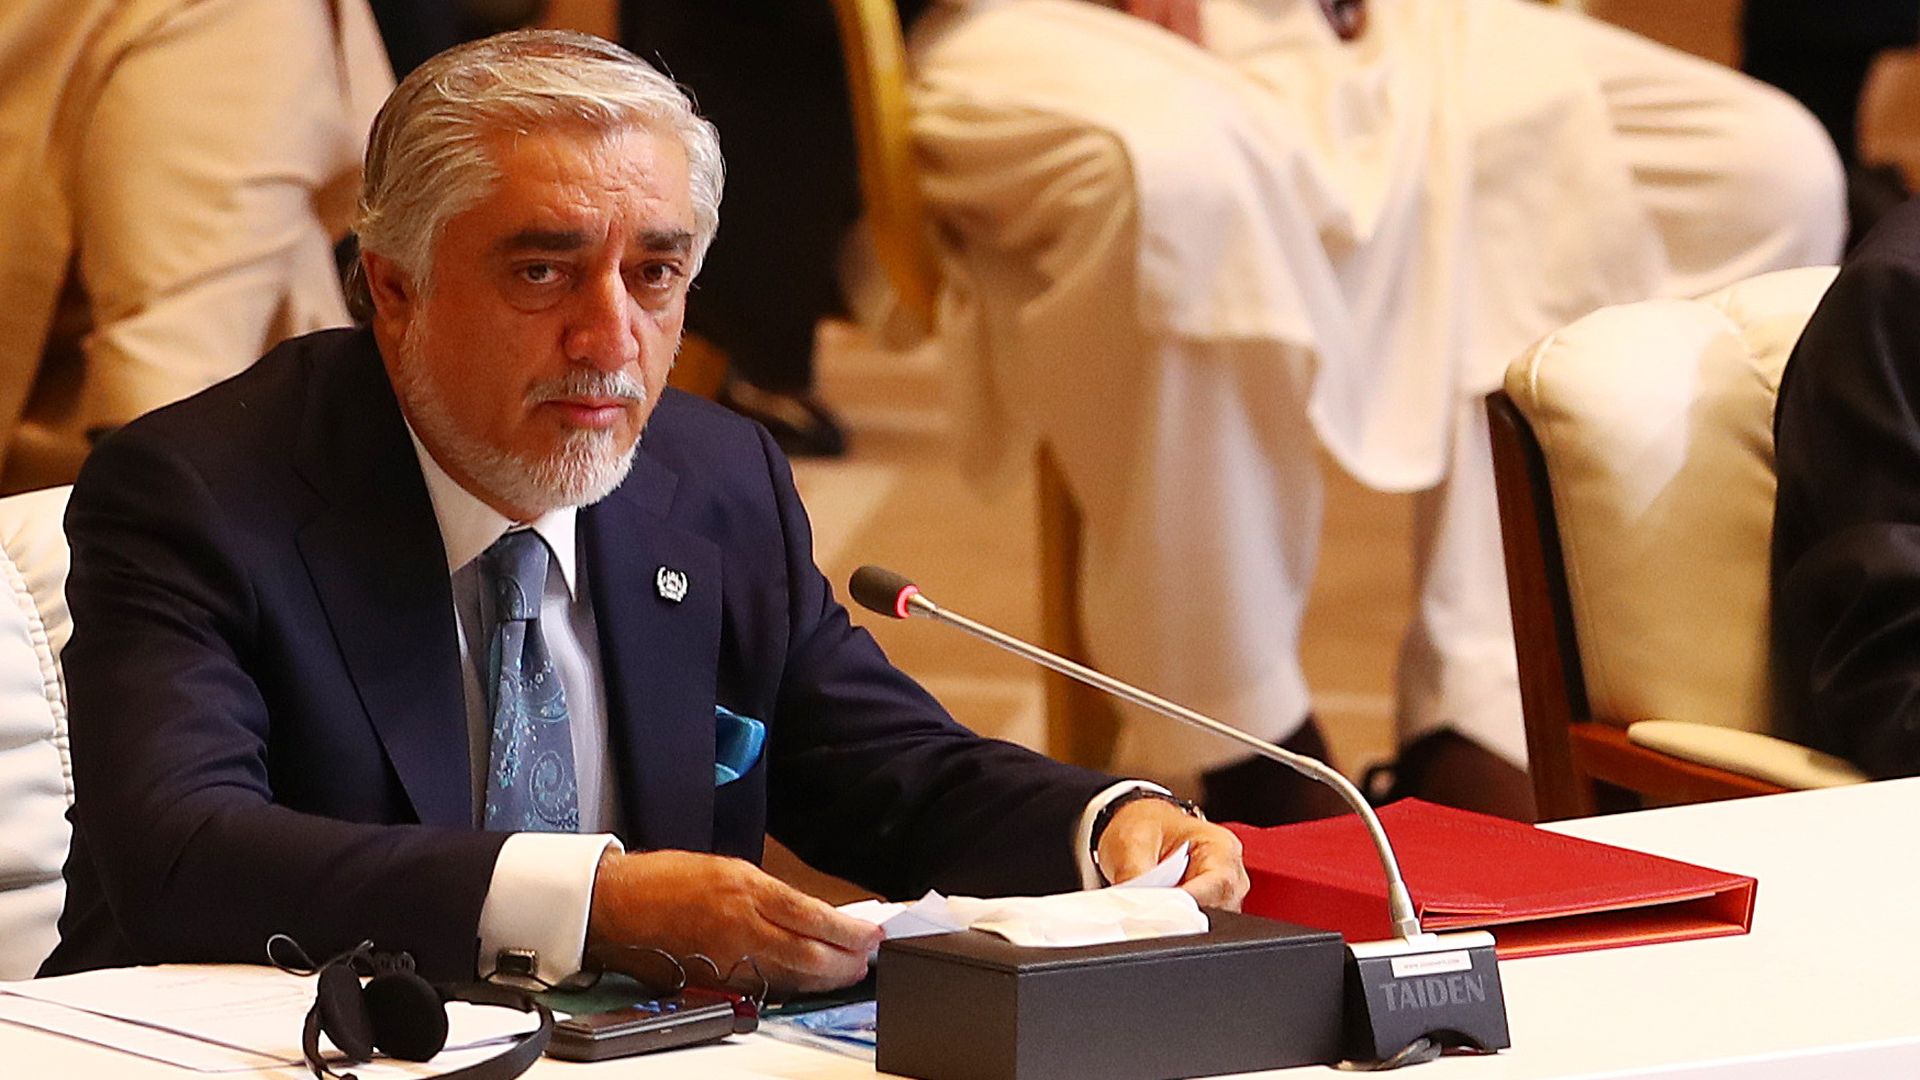 Abdullah Abdullah, the head of the Afghan government delegation at the peace talks, speaking in Doha, Qatar, on Saturday.